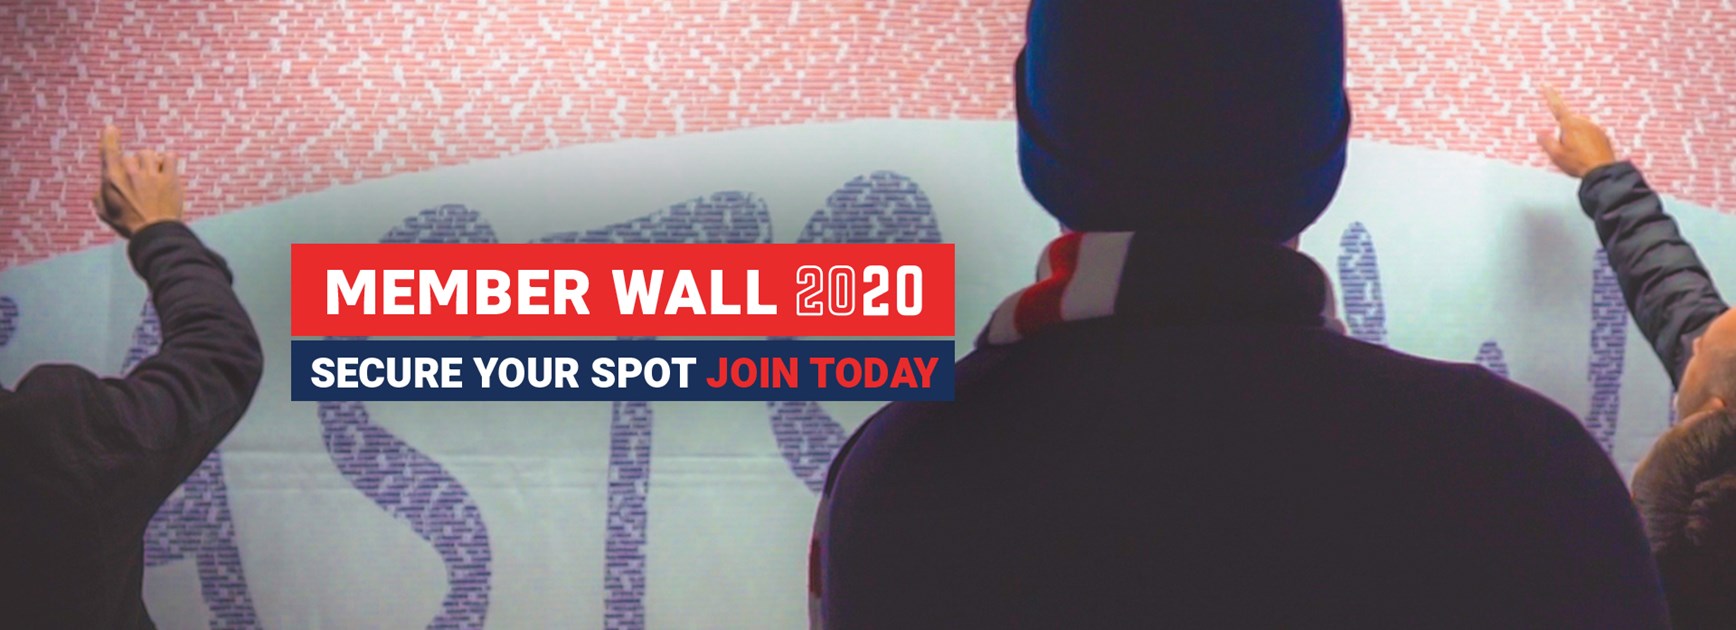 Last Chance To Be Featured On SCG Wall In 2020